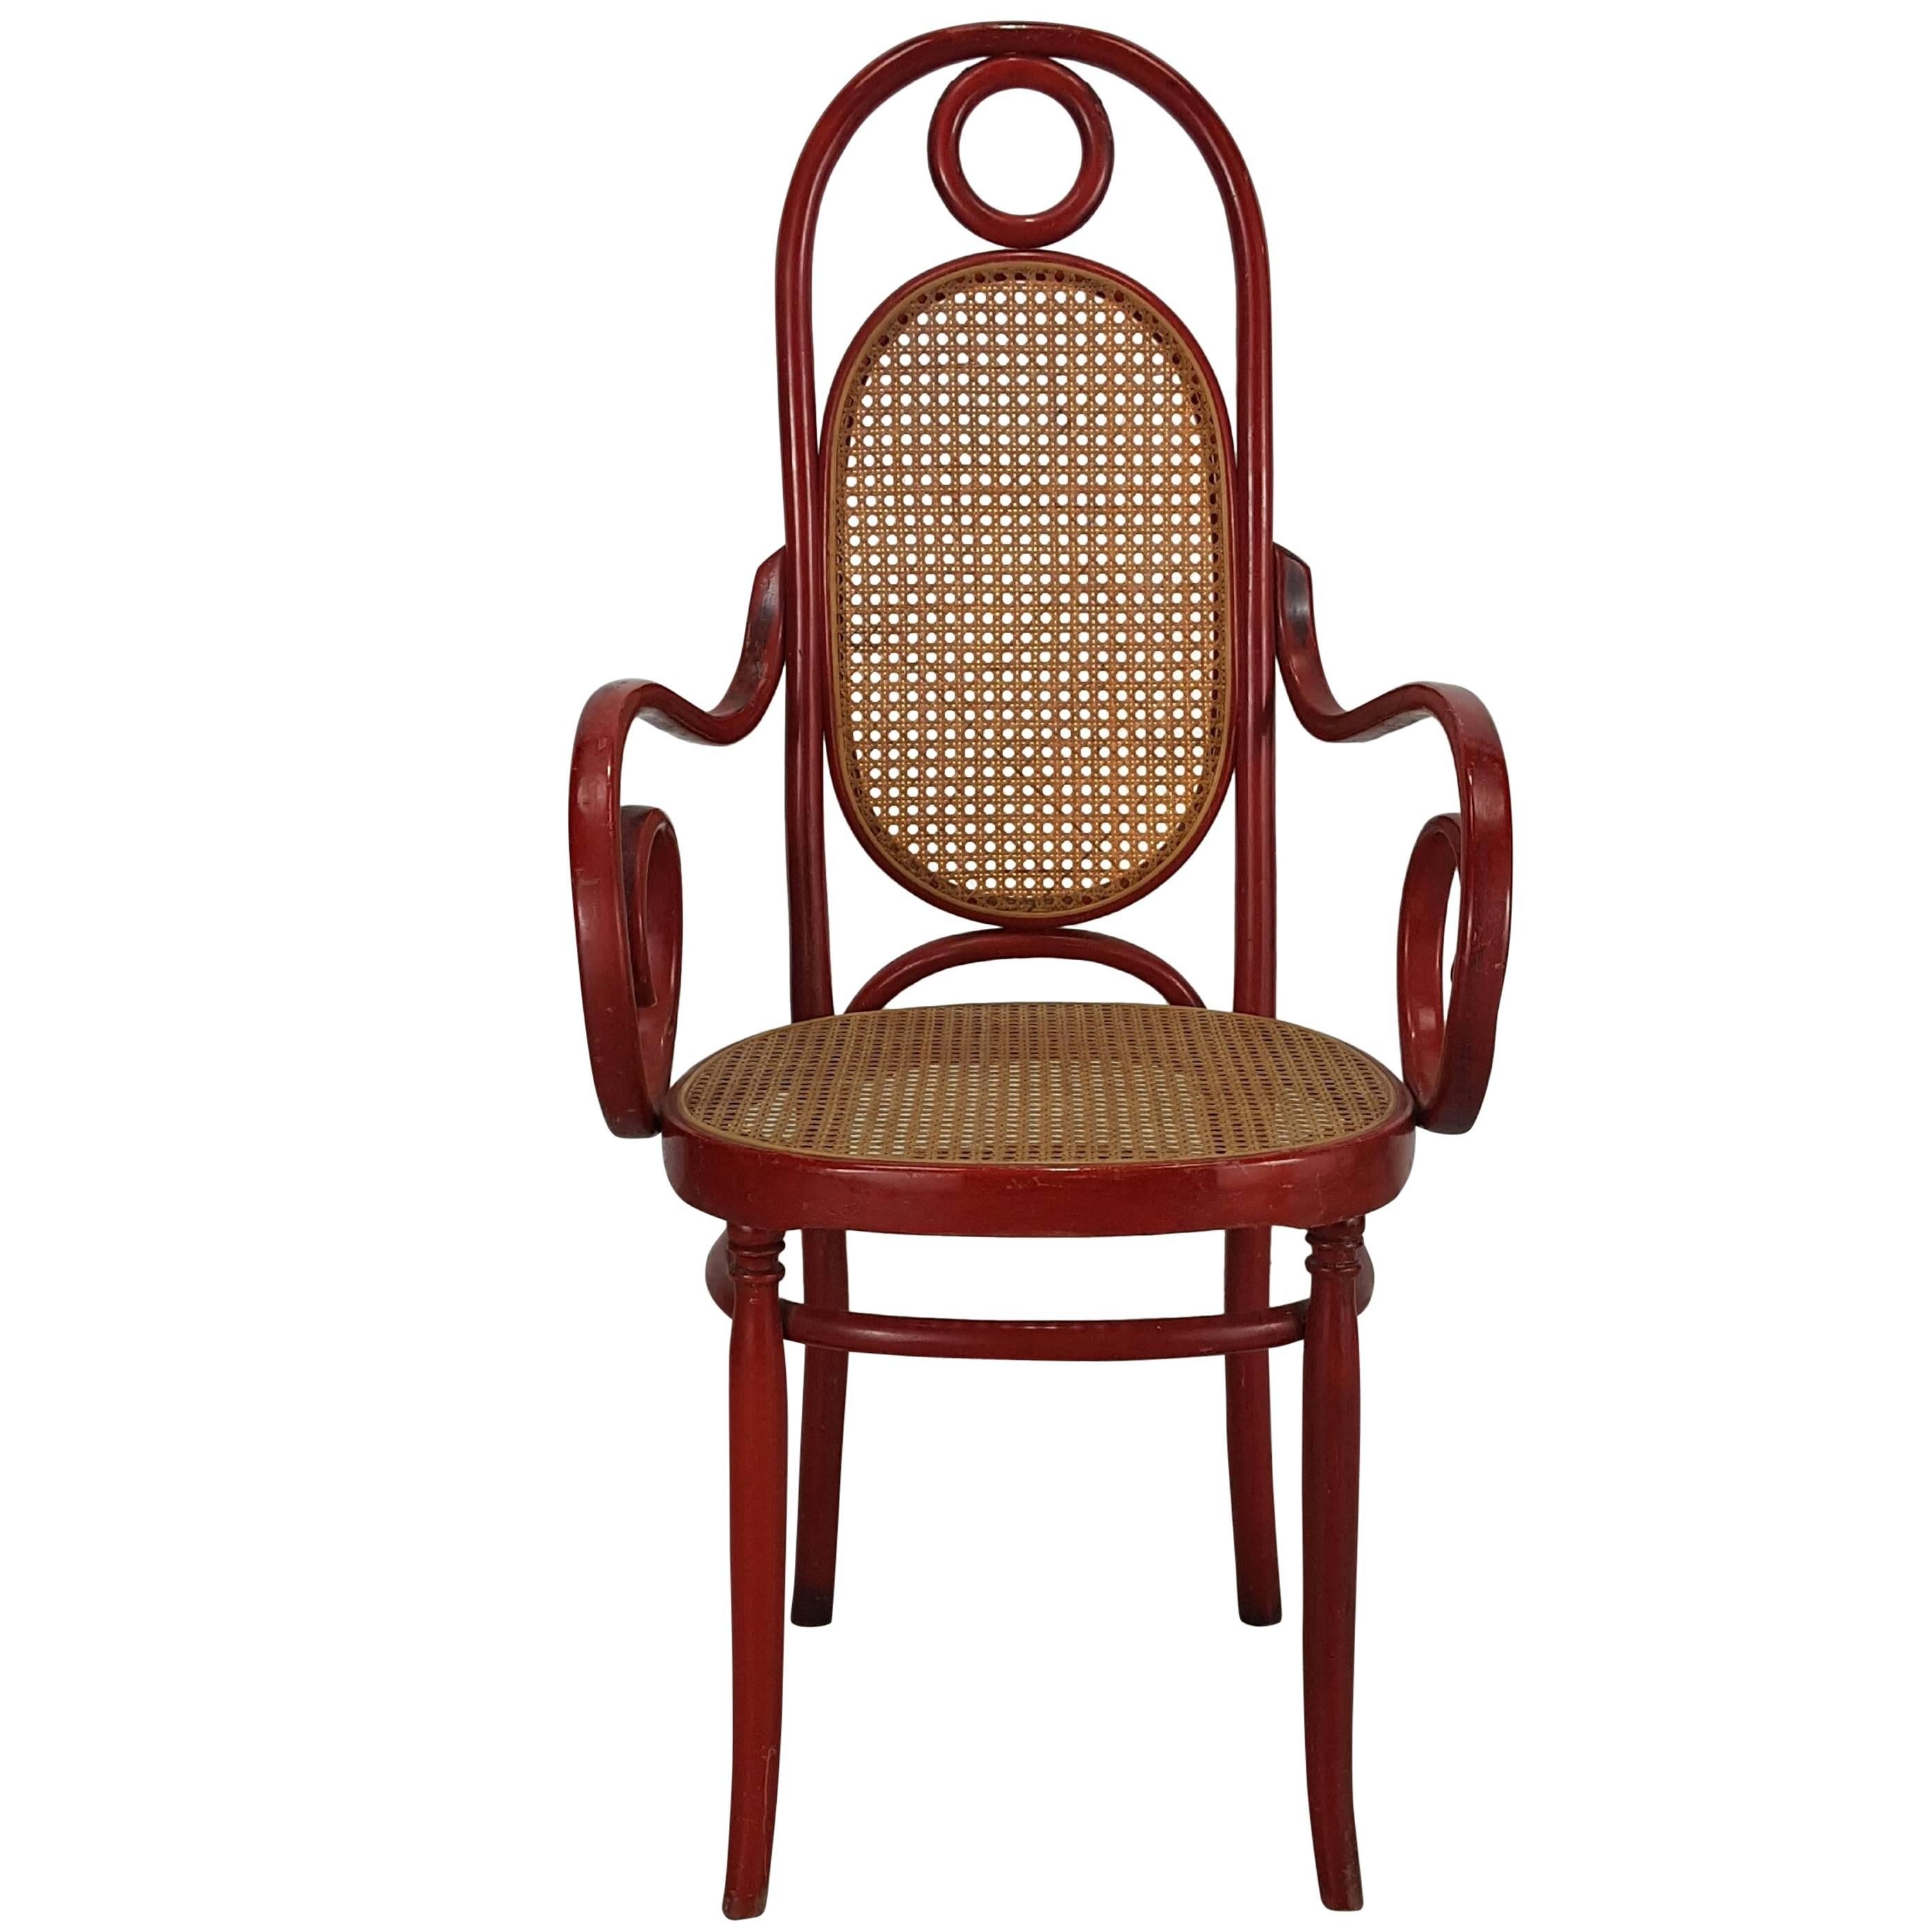  Model 17 Bentwood High Back Armchair by Michael Thonet For Sale